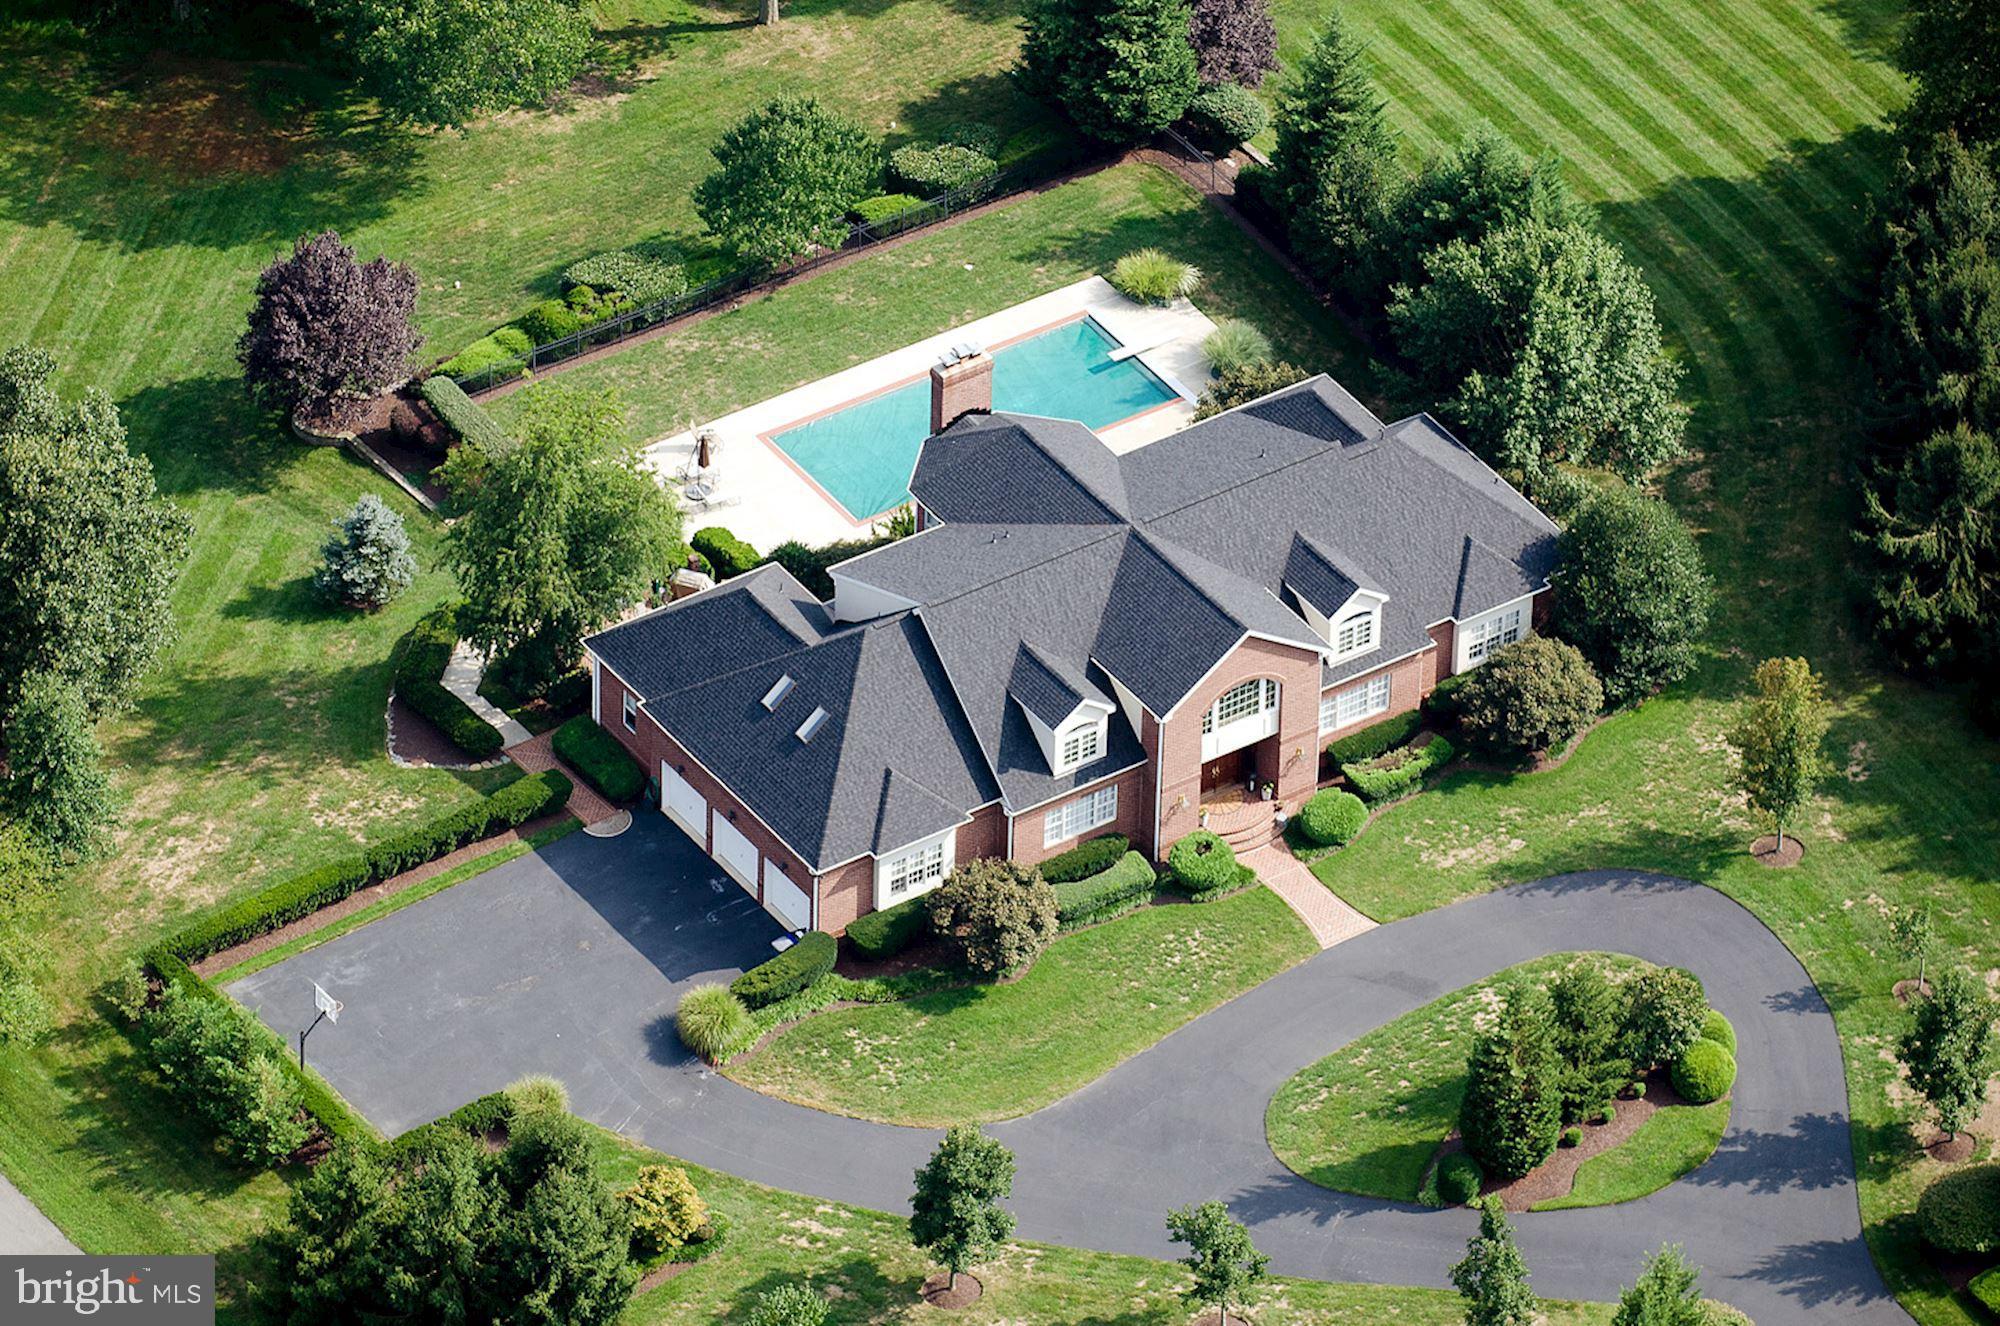 an aerial view of a house with a big yard and large trees